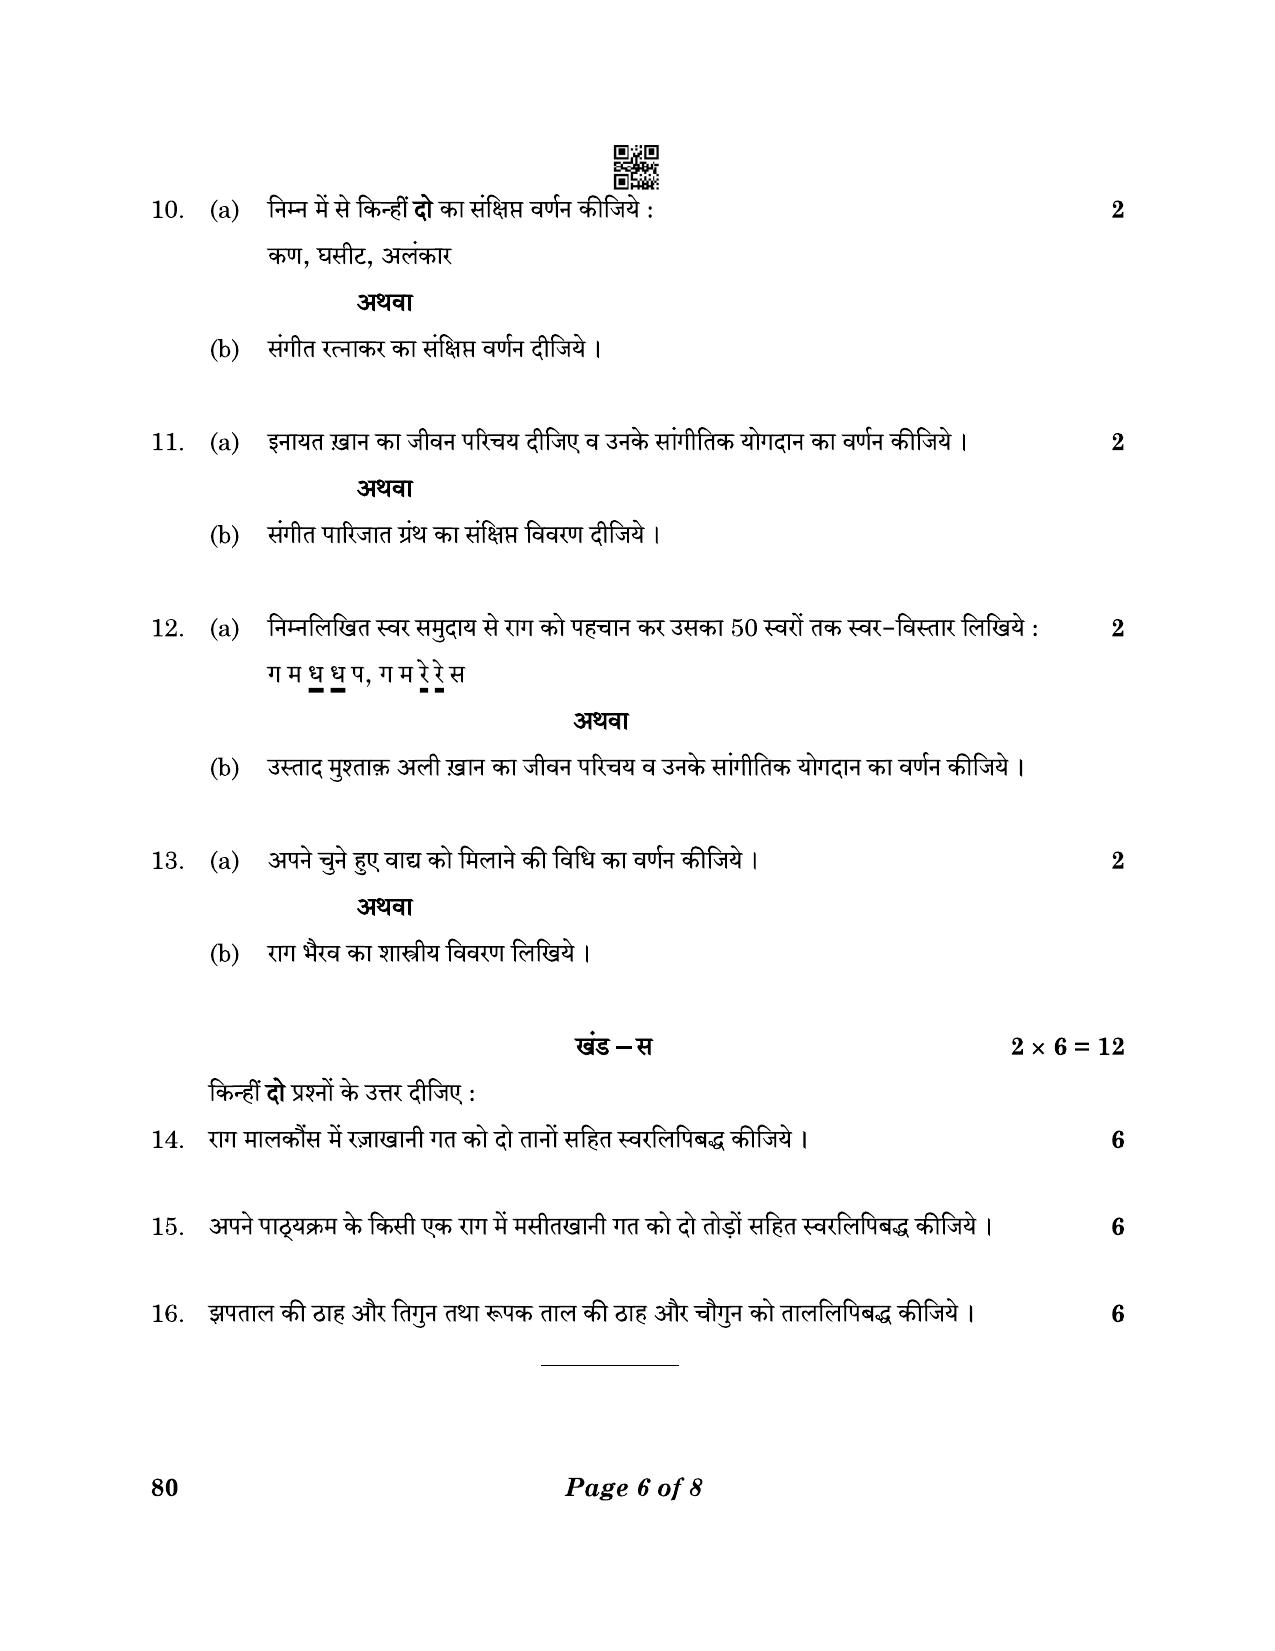 CBSE Class 12 79_Music Hindustani Mel. Ins. 2023 Question Paper - Page 6